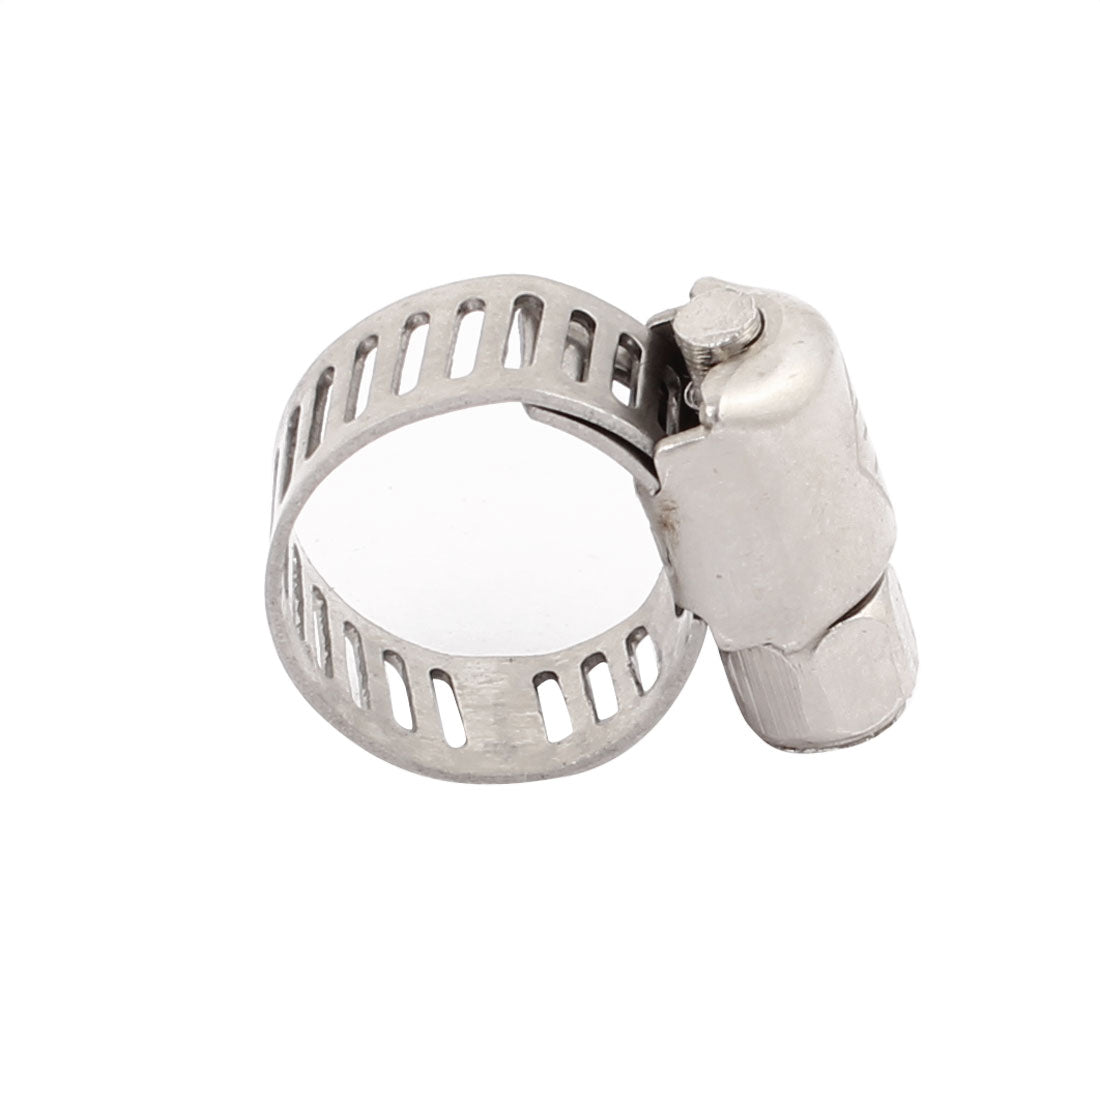 uxcell Uxcell 6mm-12mm Adjustable Range 8mm Width Stainless Steel  Gear Hose Clamp 50pcs